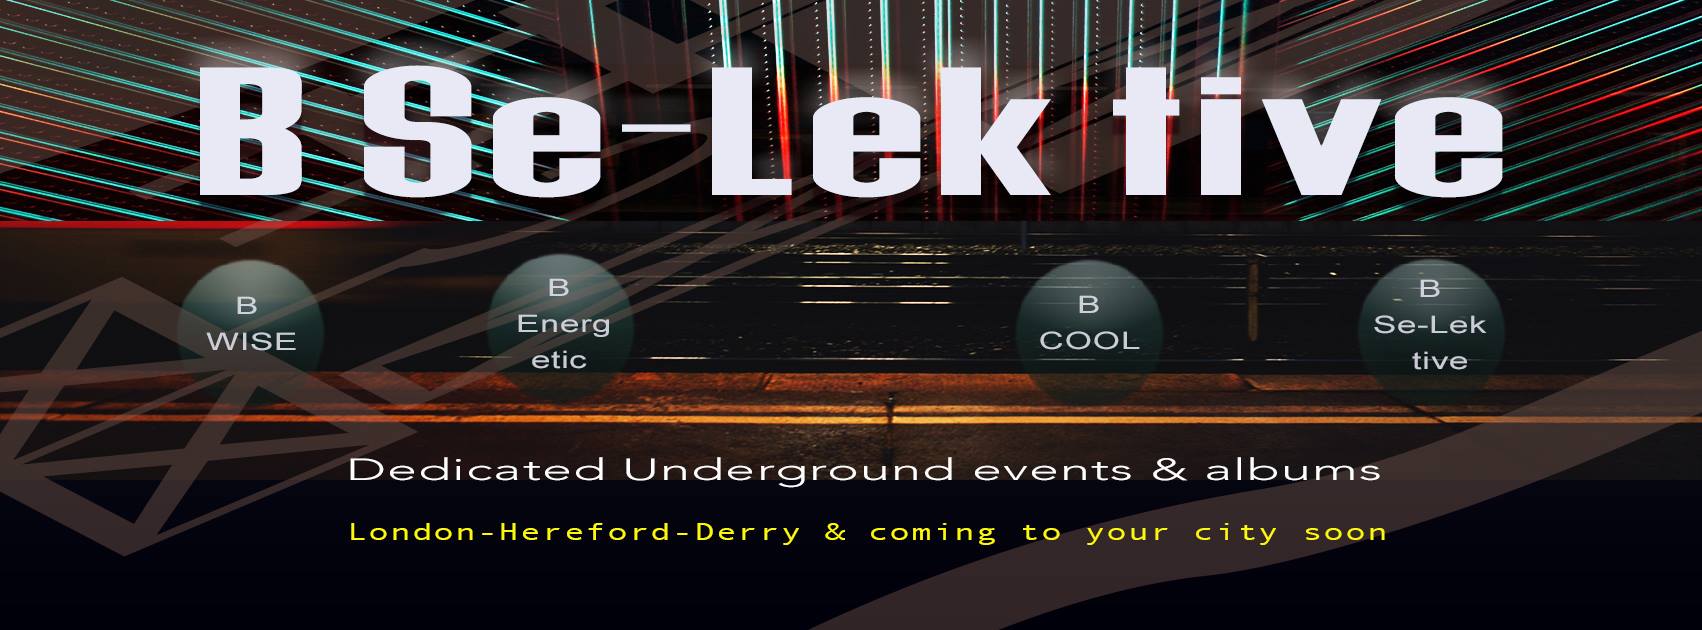 B Se-Lek tive Dedicated Underground Events and Albums